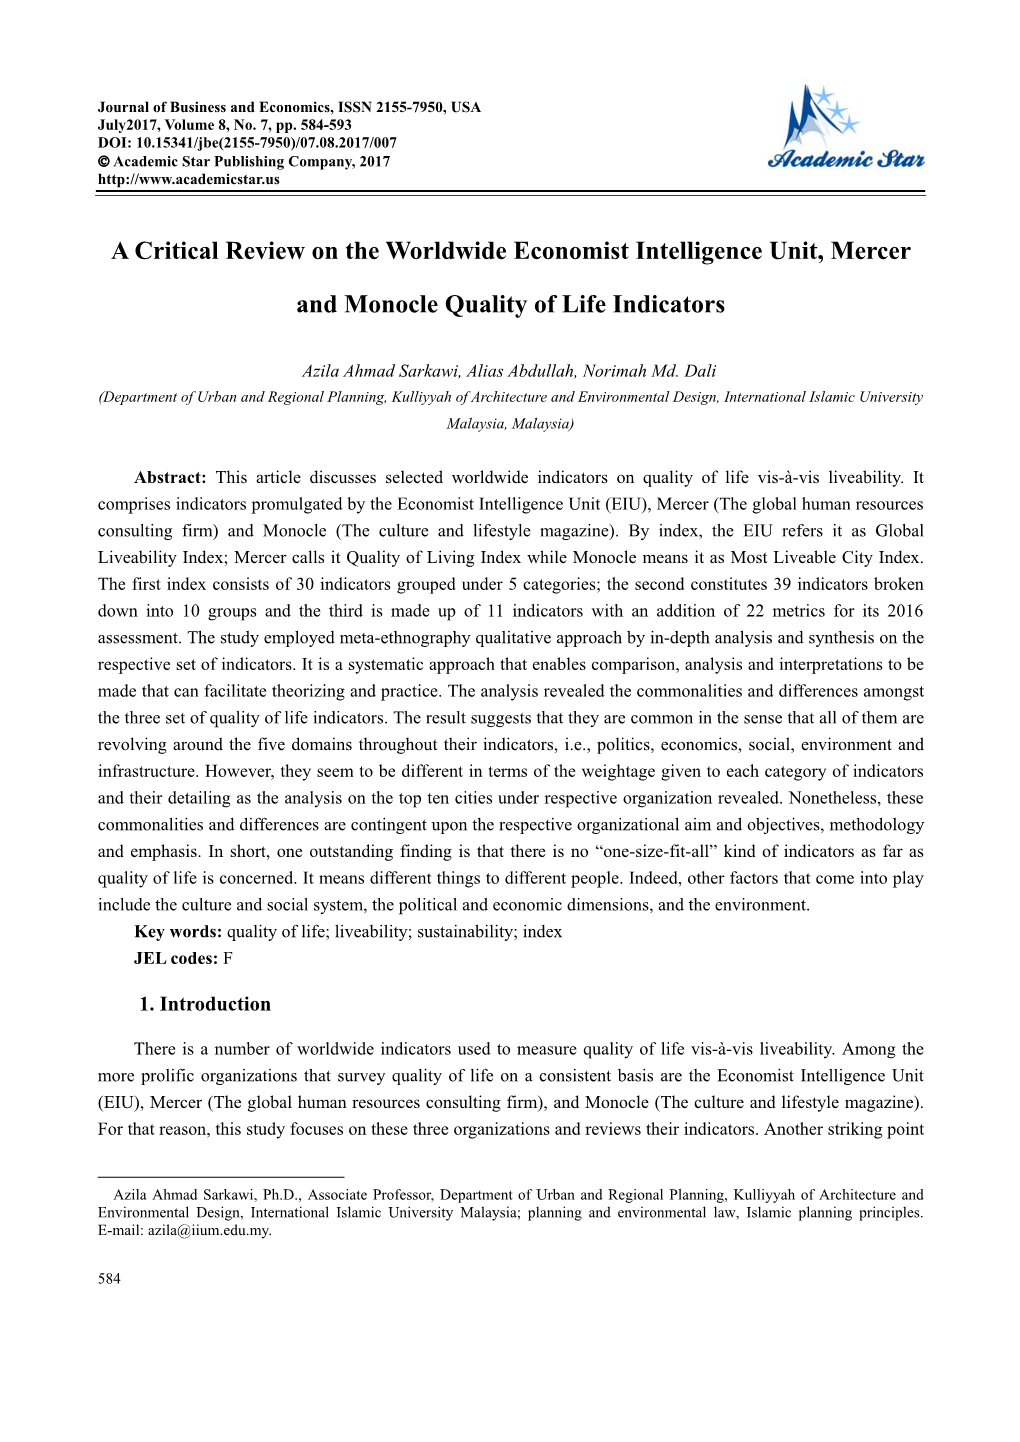 A Critical Review on the Worldwide Economist Intelligence Unit, Mercer